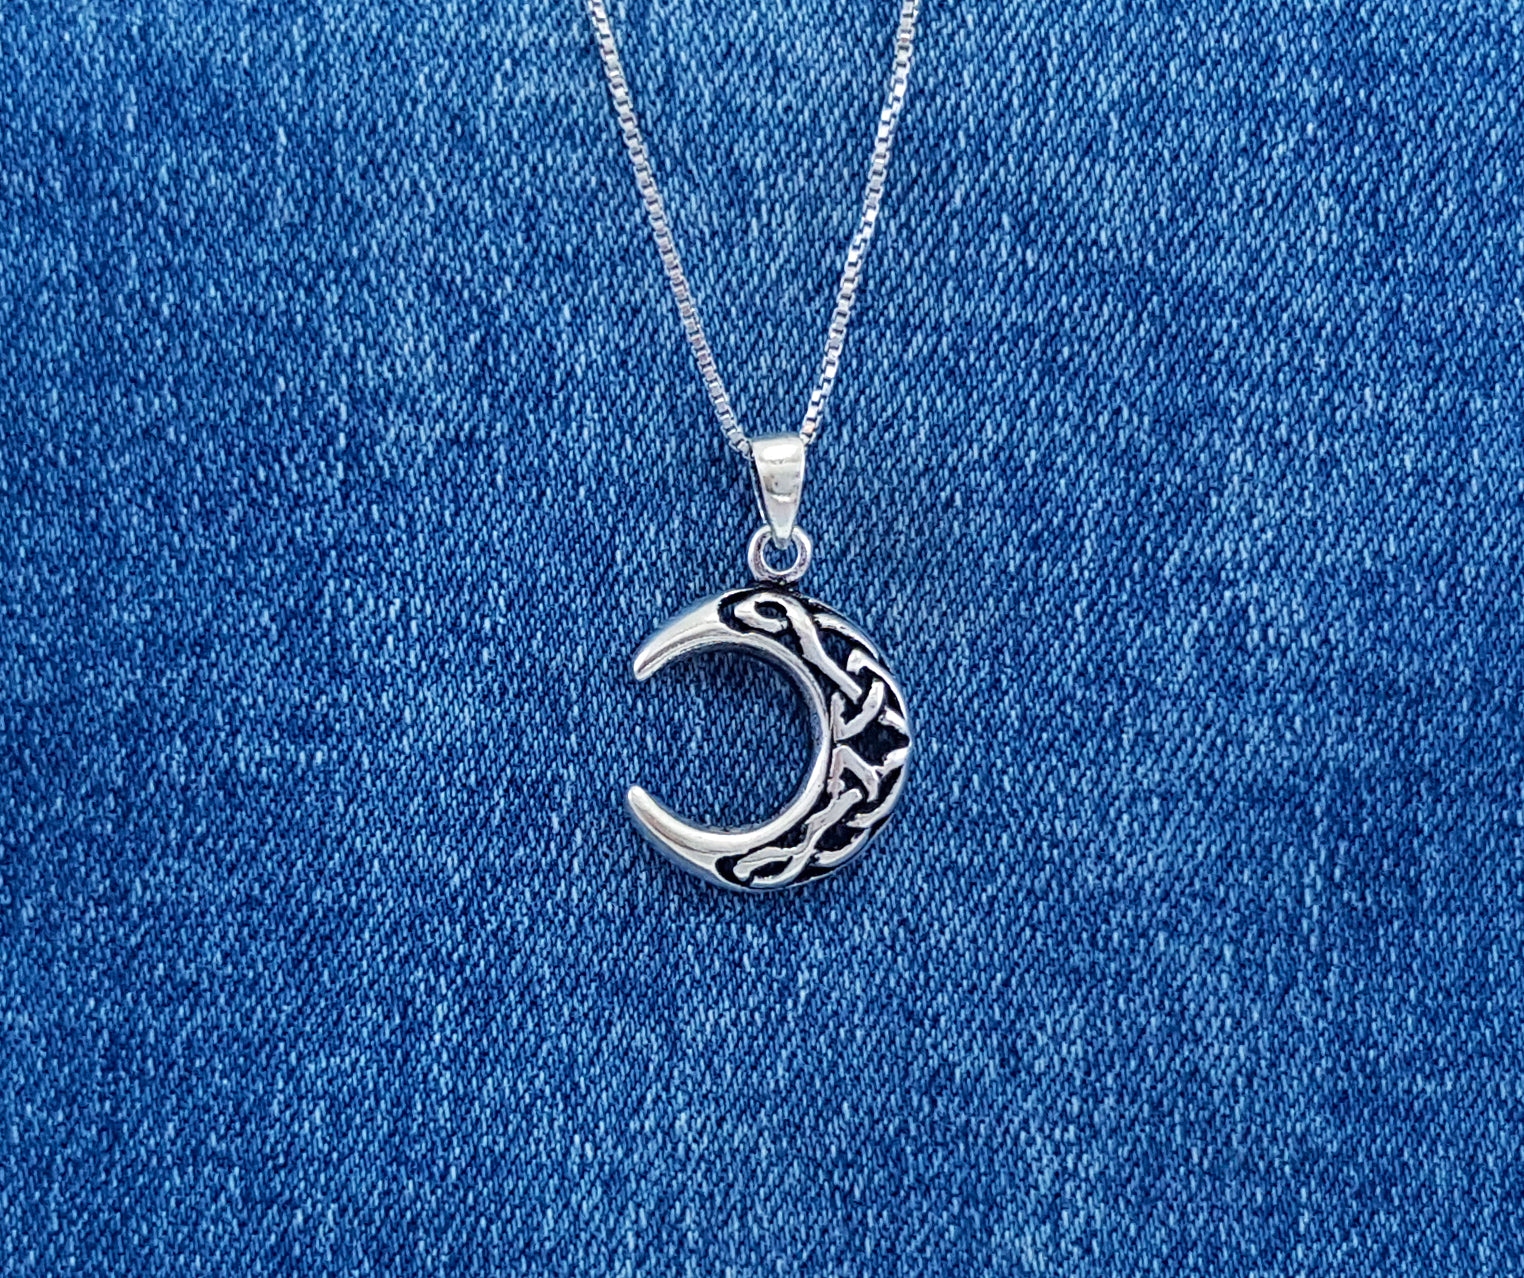 Sterling Silver Crescent Moon Pendant Charm.